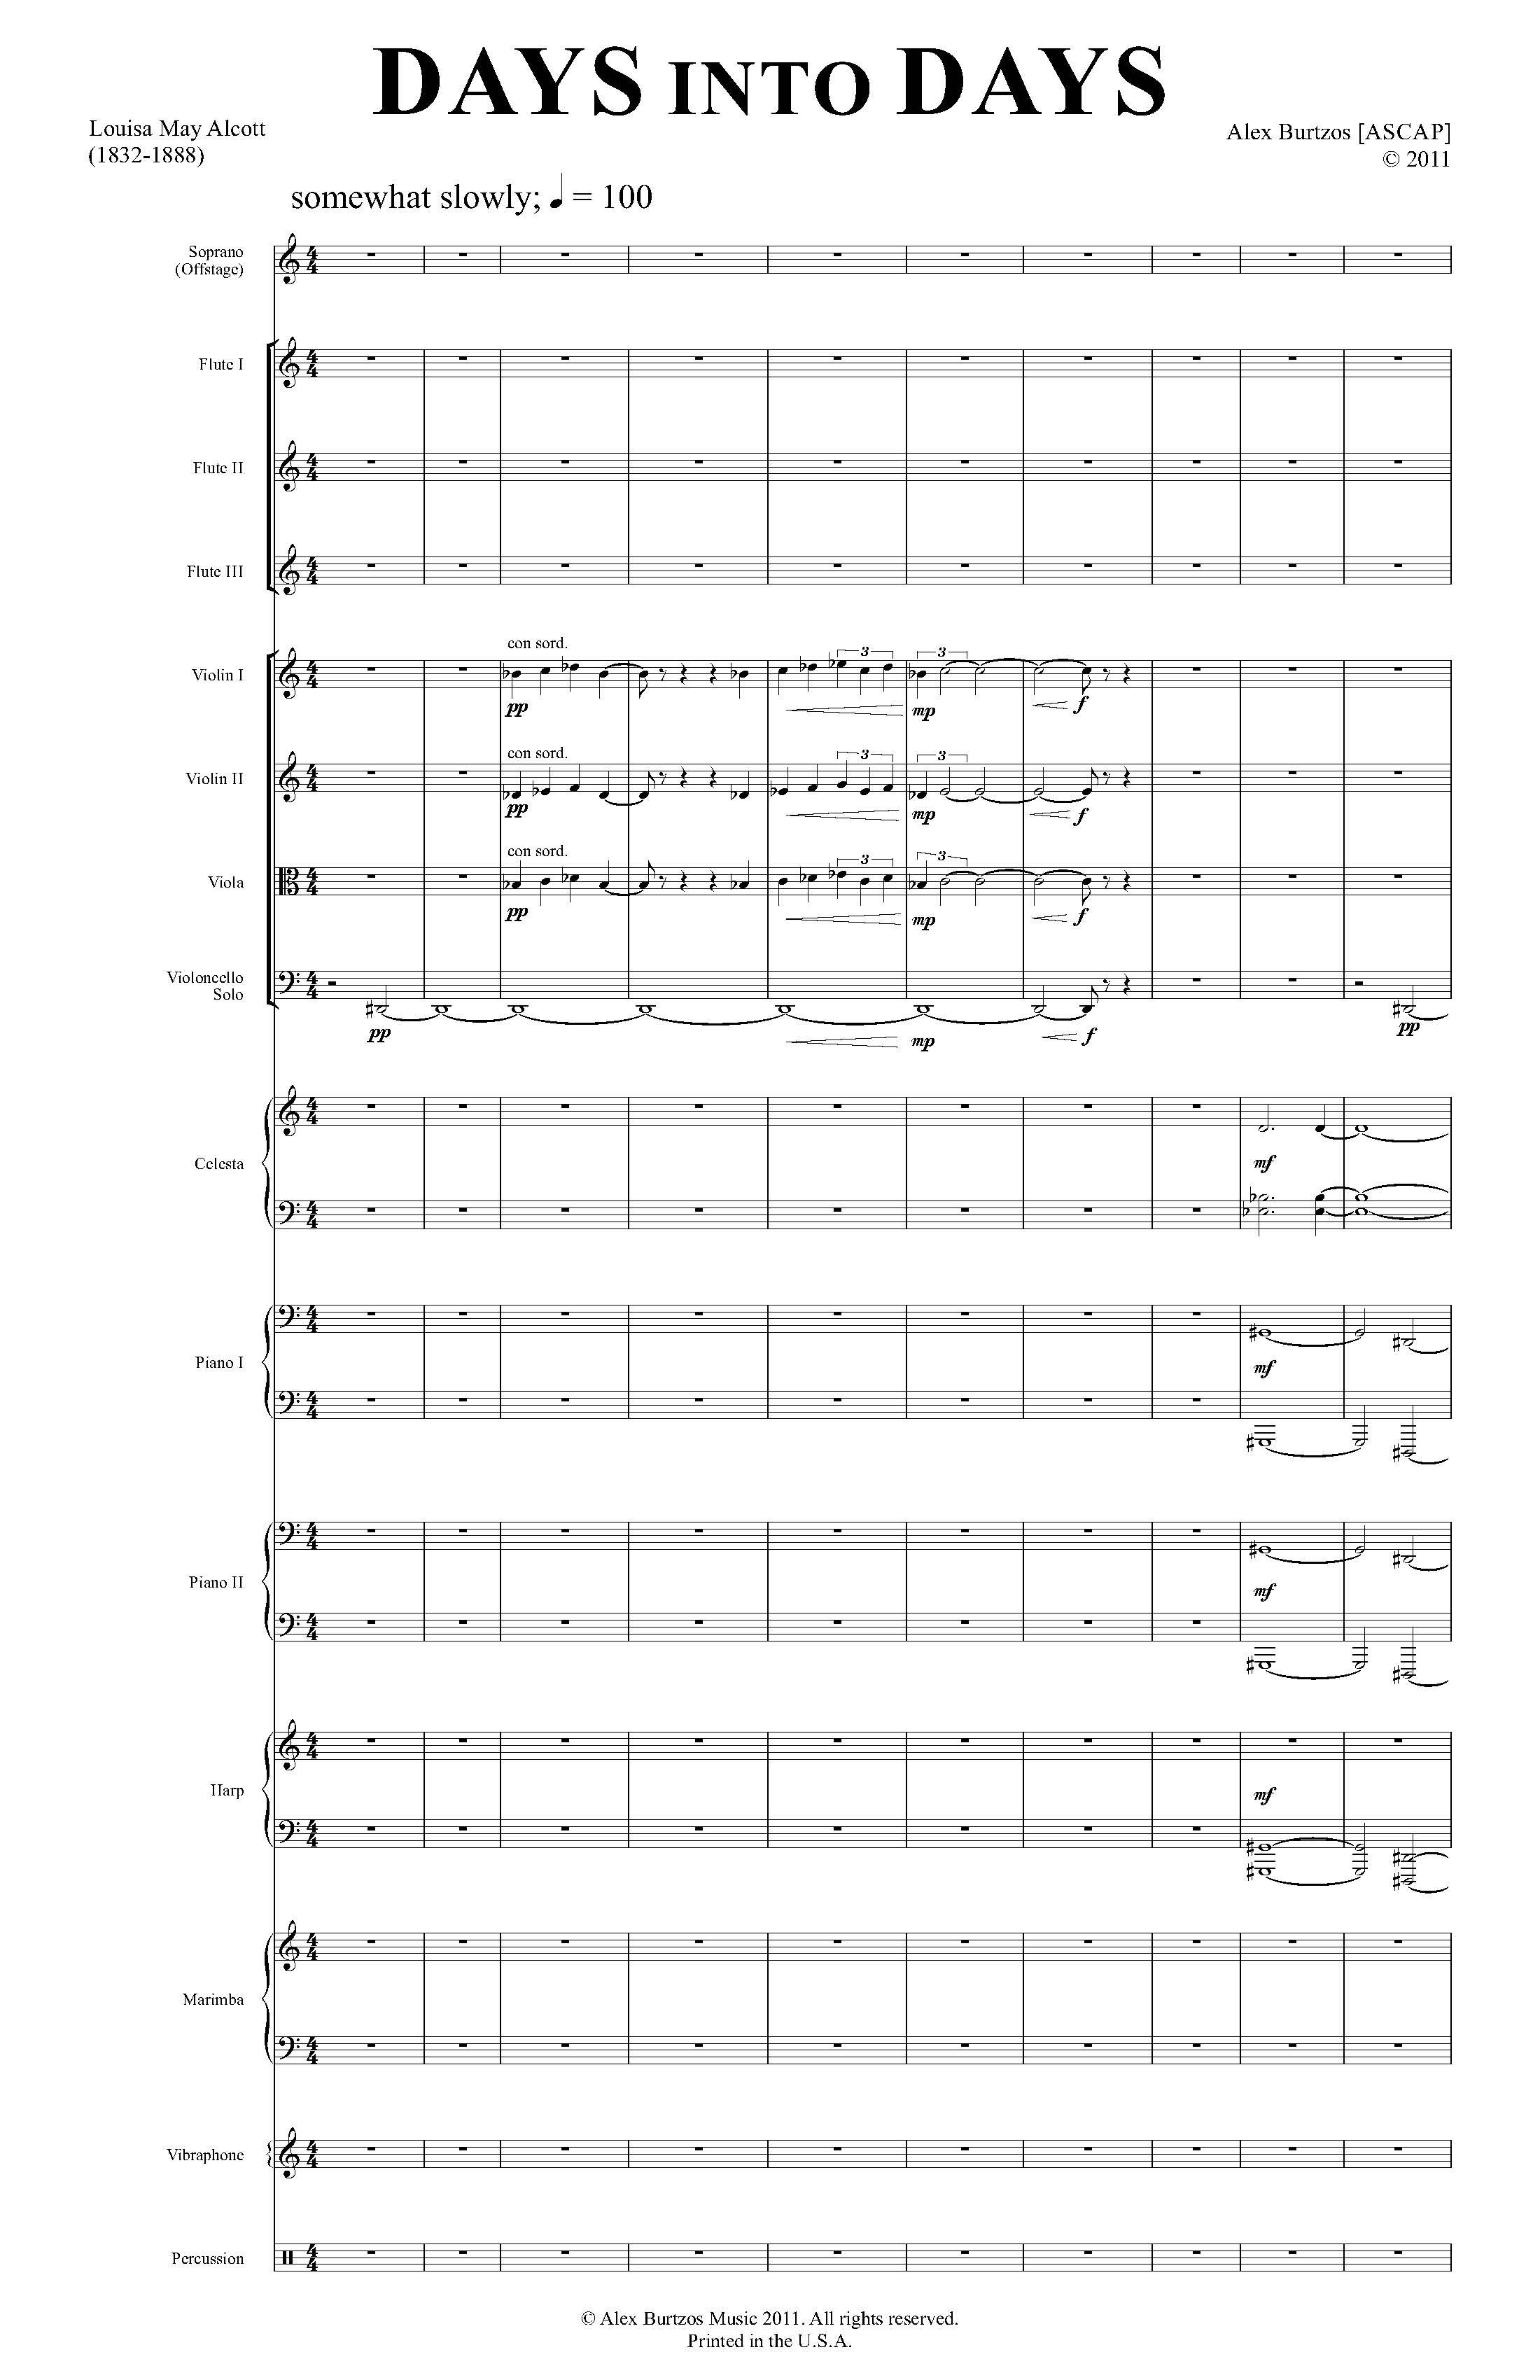 Days Into Days - Complete Score_Page_07.jpg